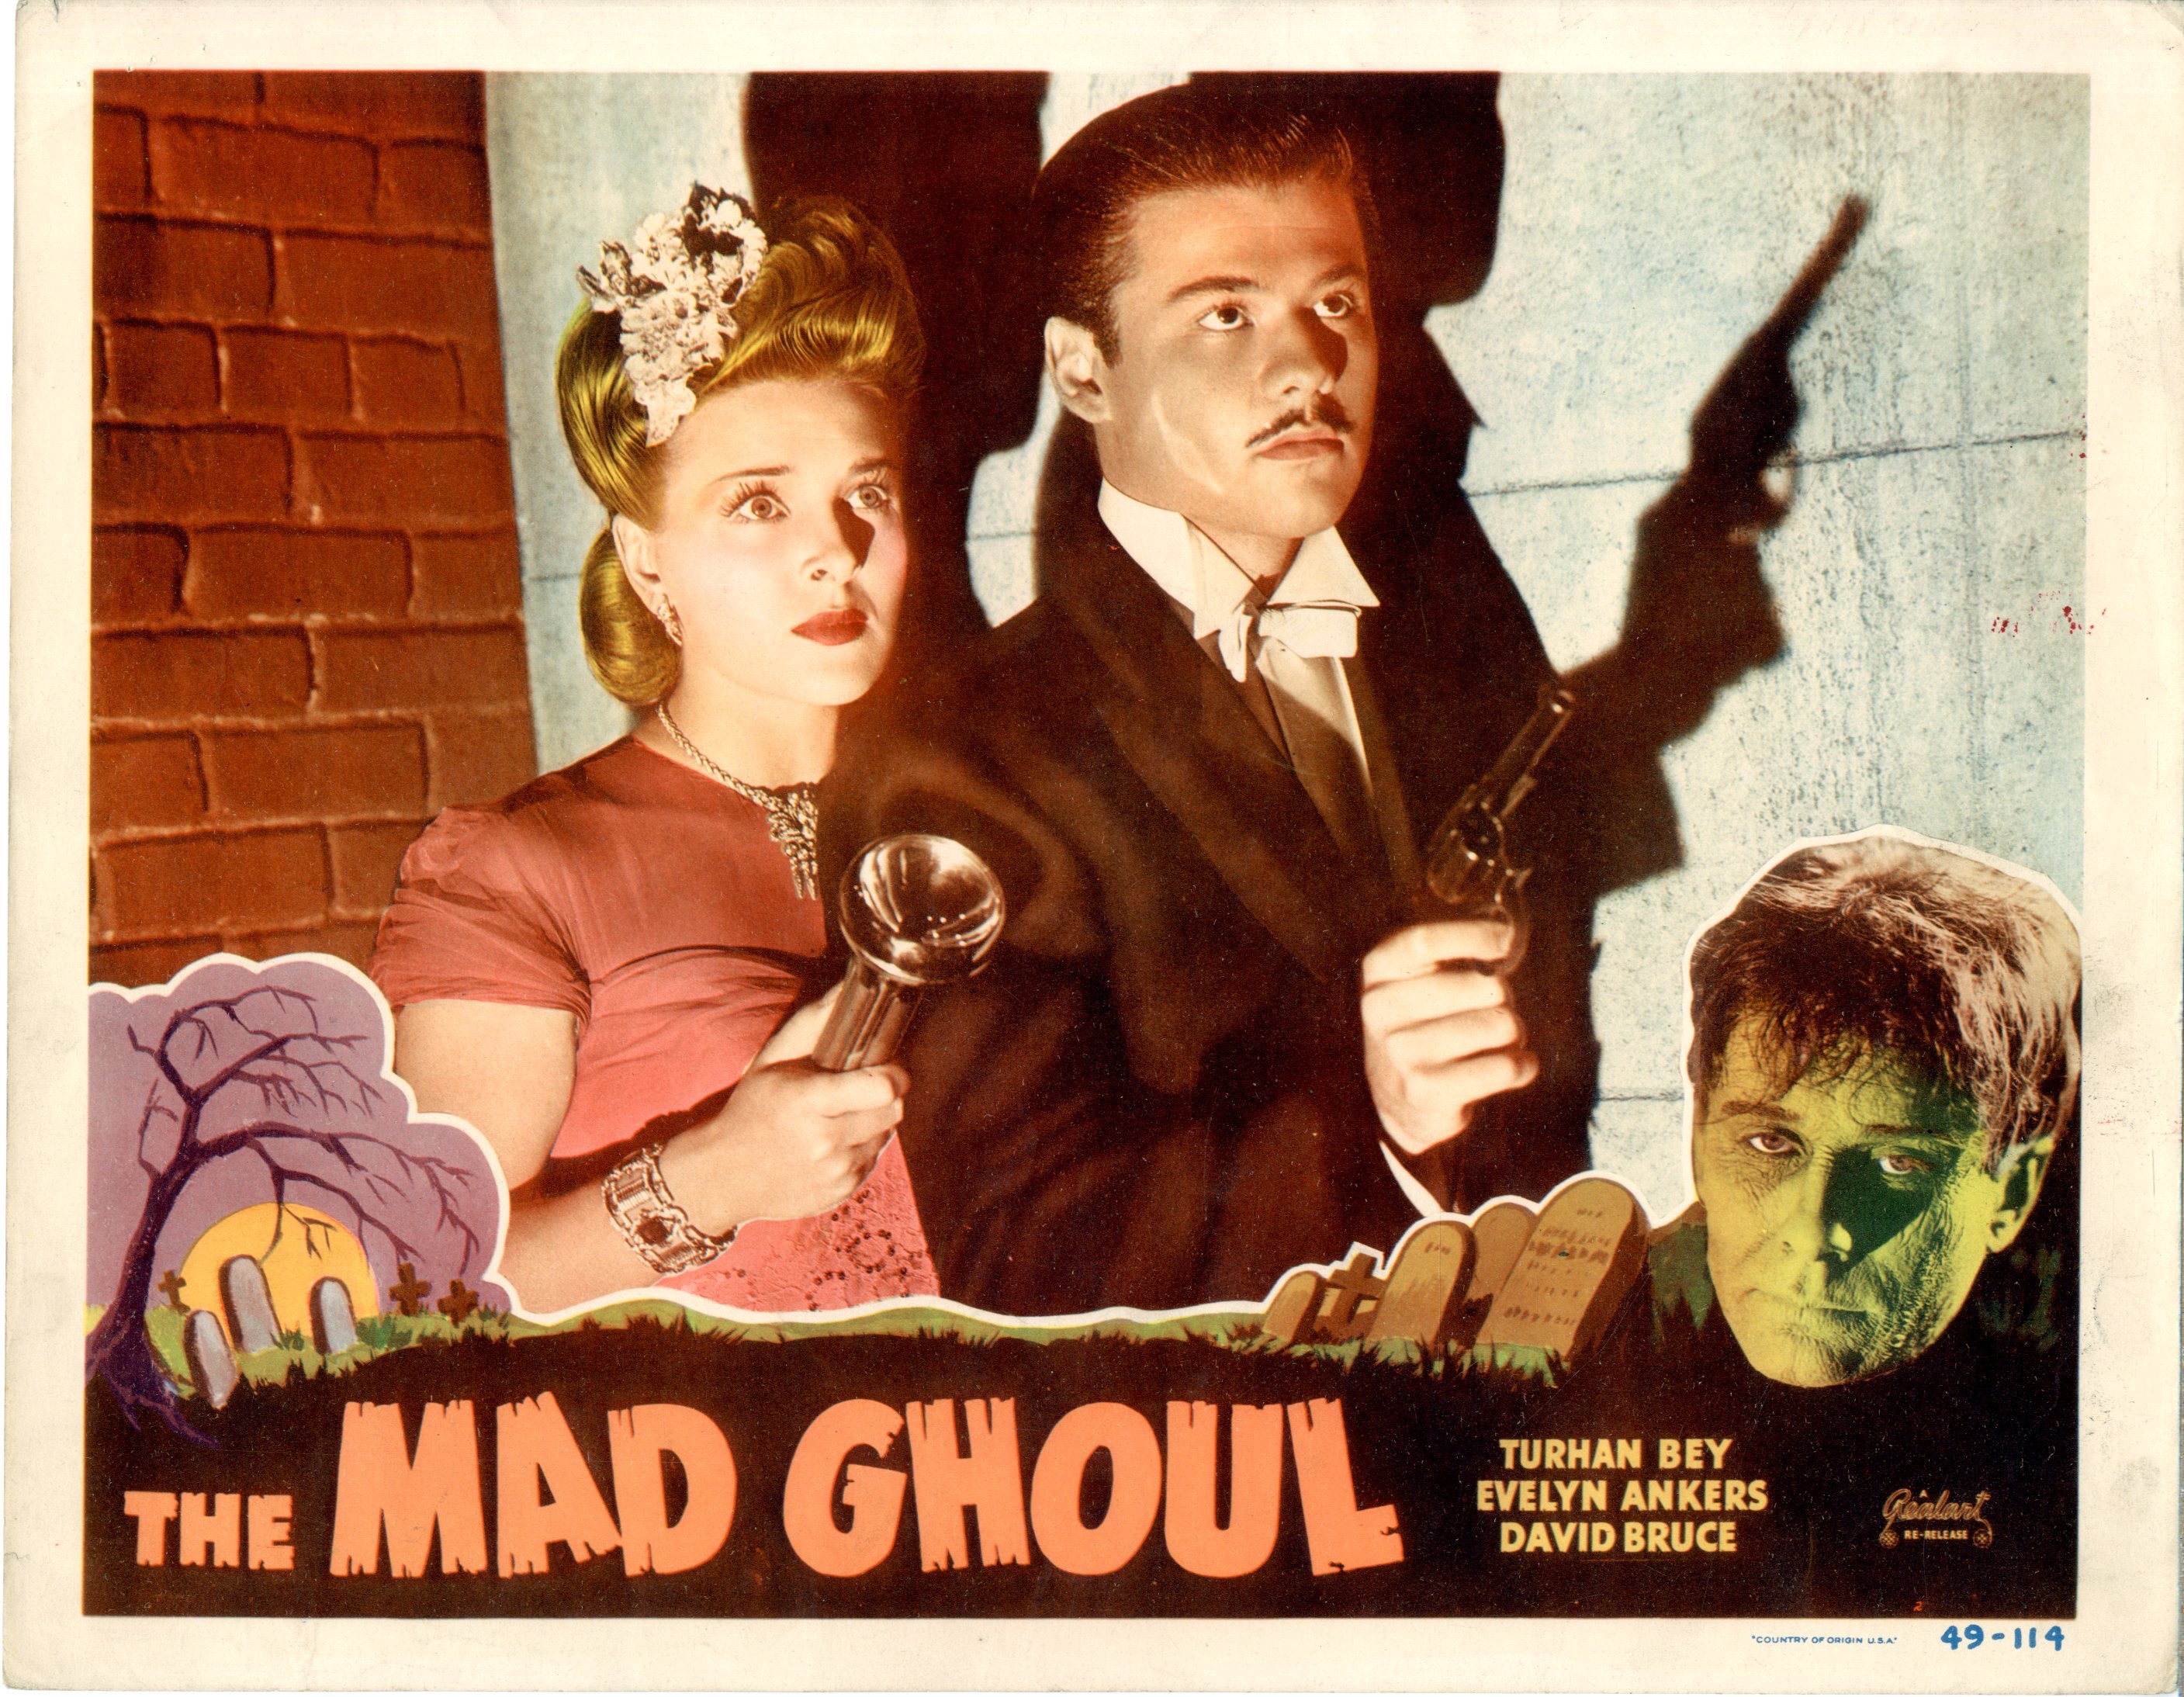 The Mad Ghoul (Film) - TV Tropes